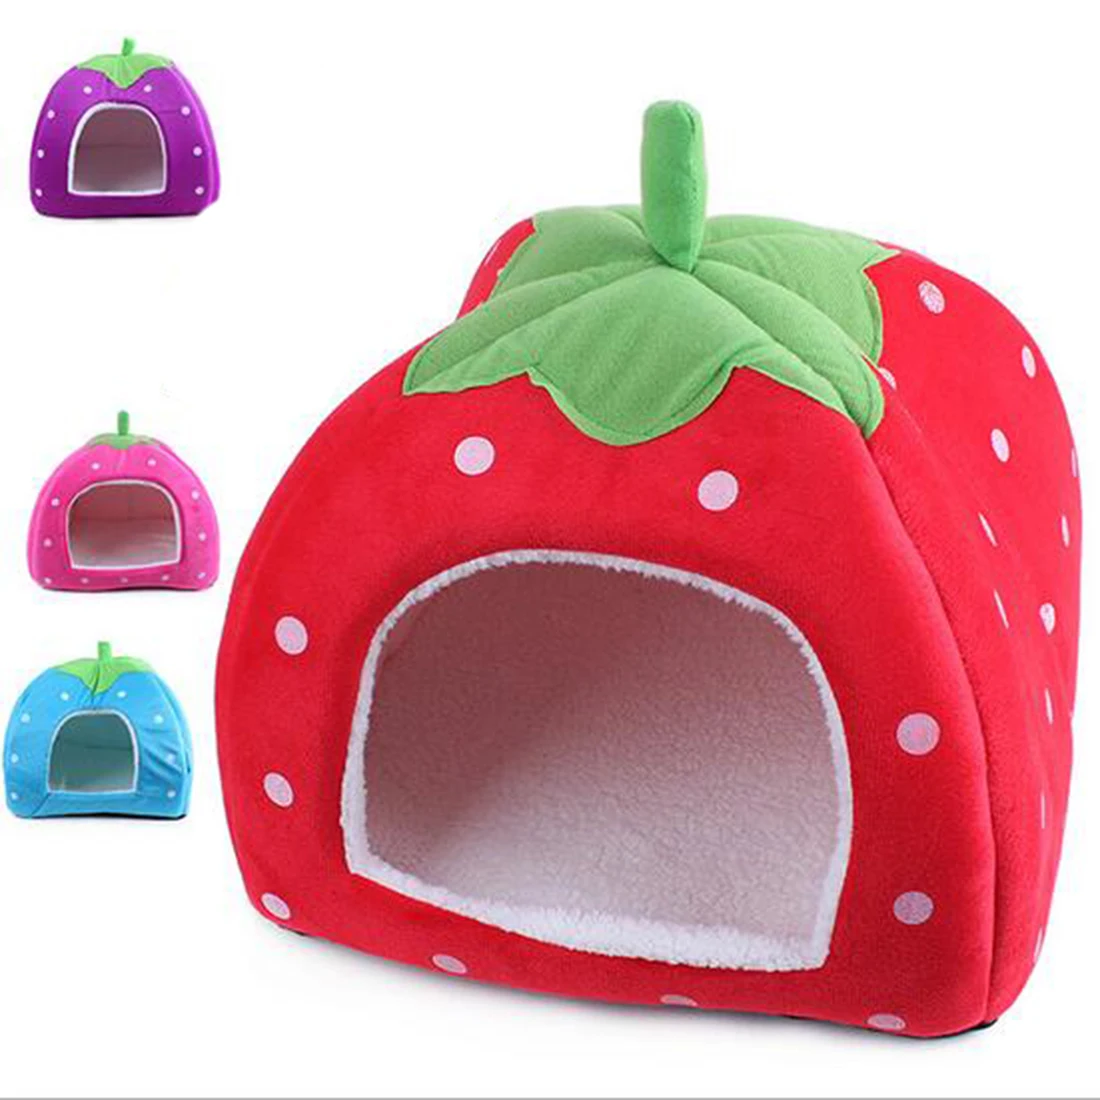 

For Warm Soft Strawberry Pet Dog Cat House Comfortable Kennel Doggy Bed Foldable Fashion Cushion Basket Cute Animal Cave Pet